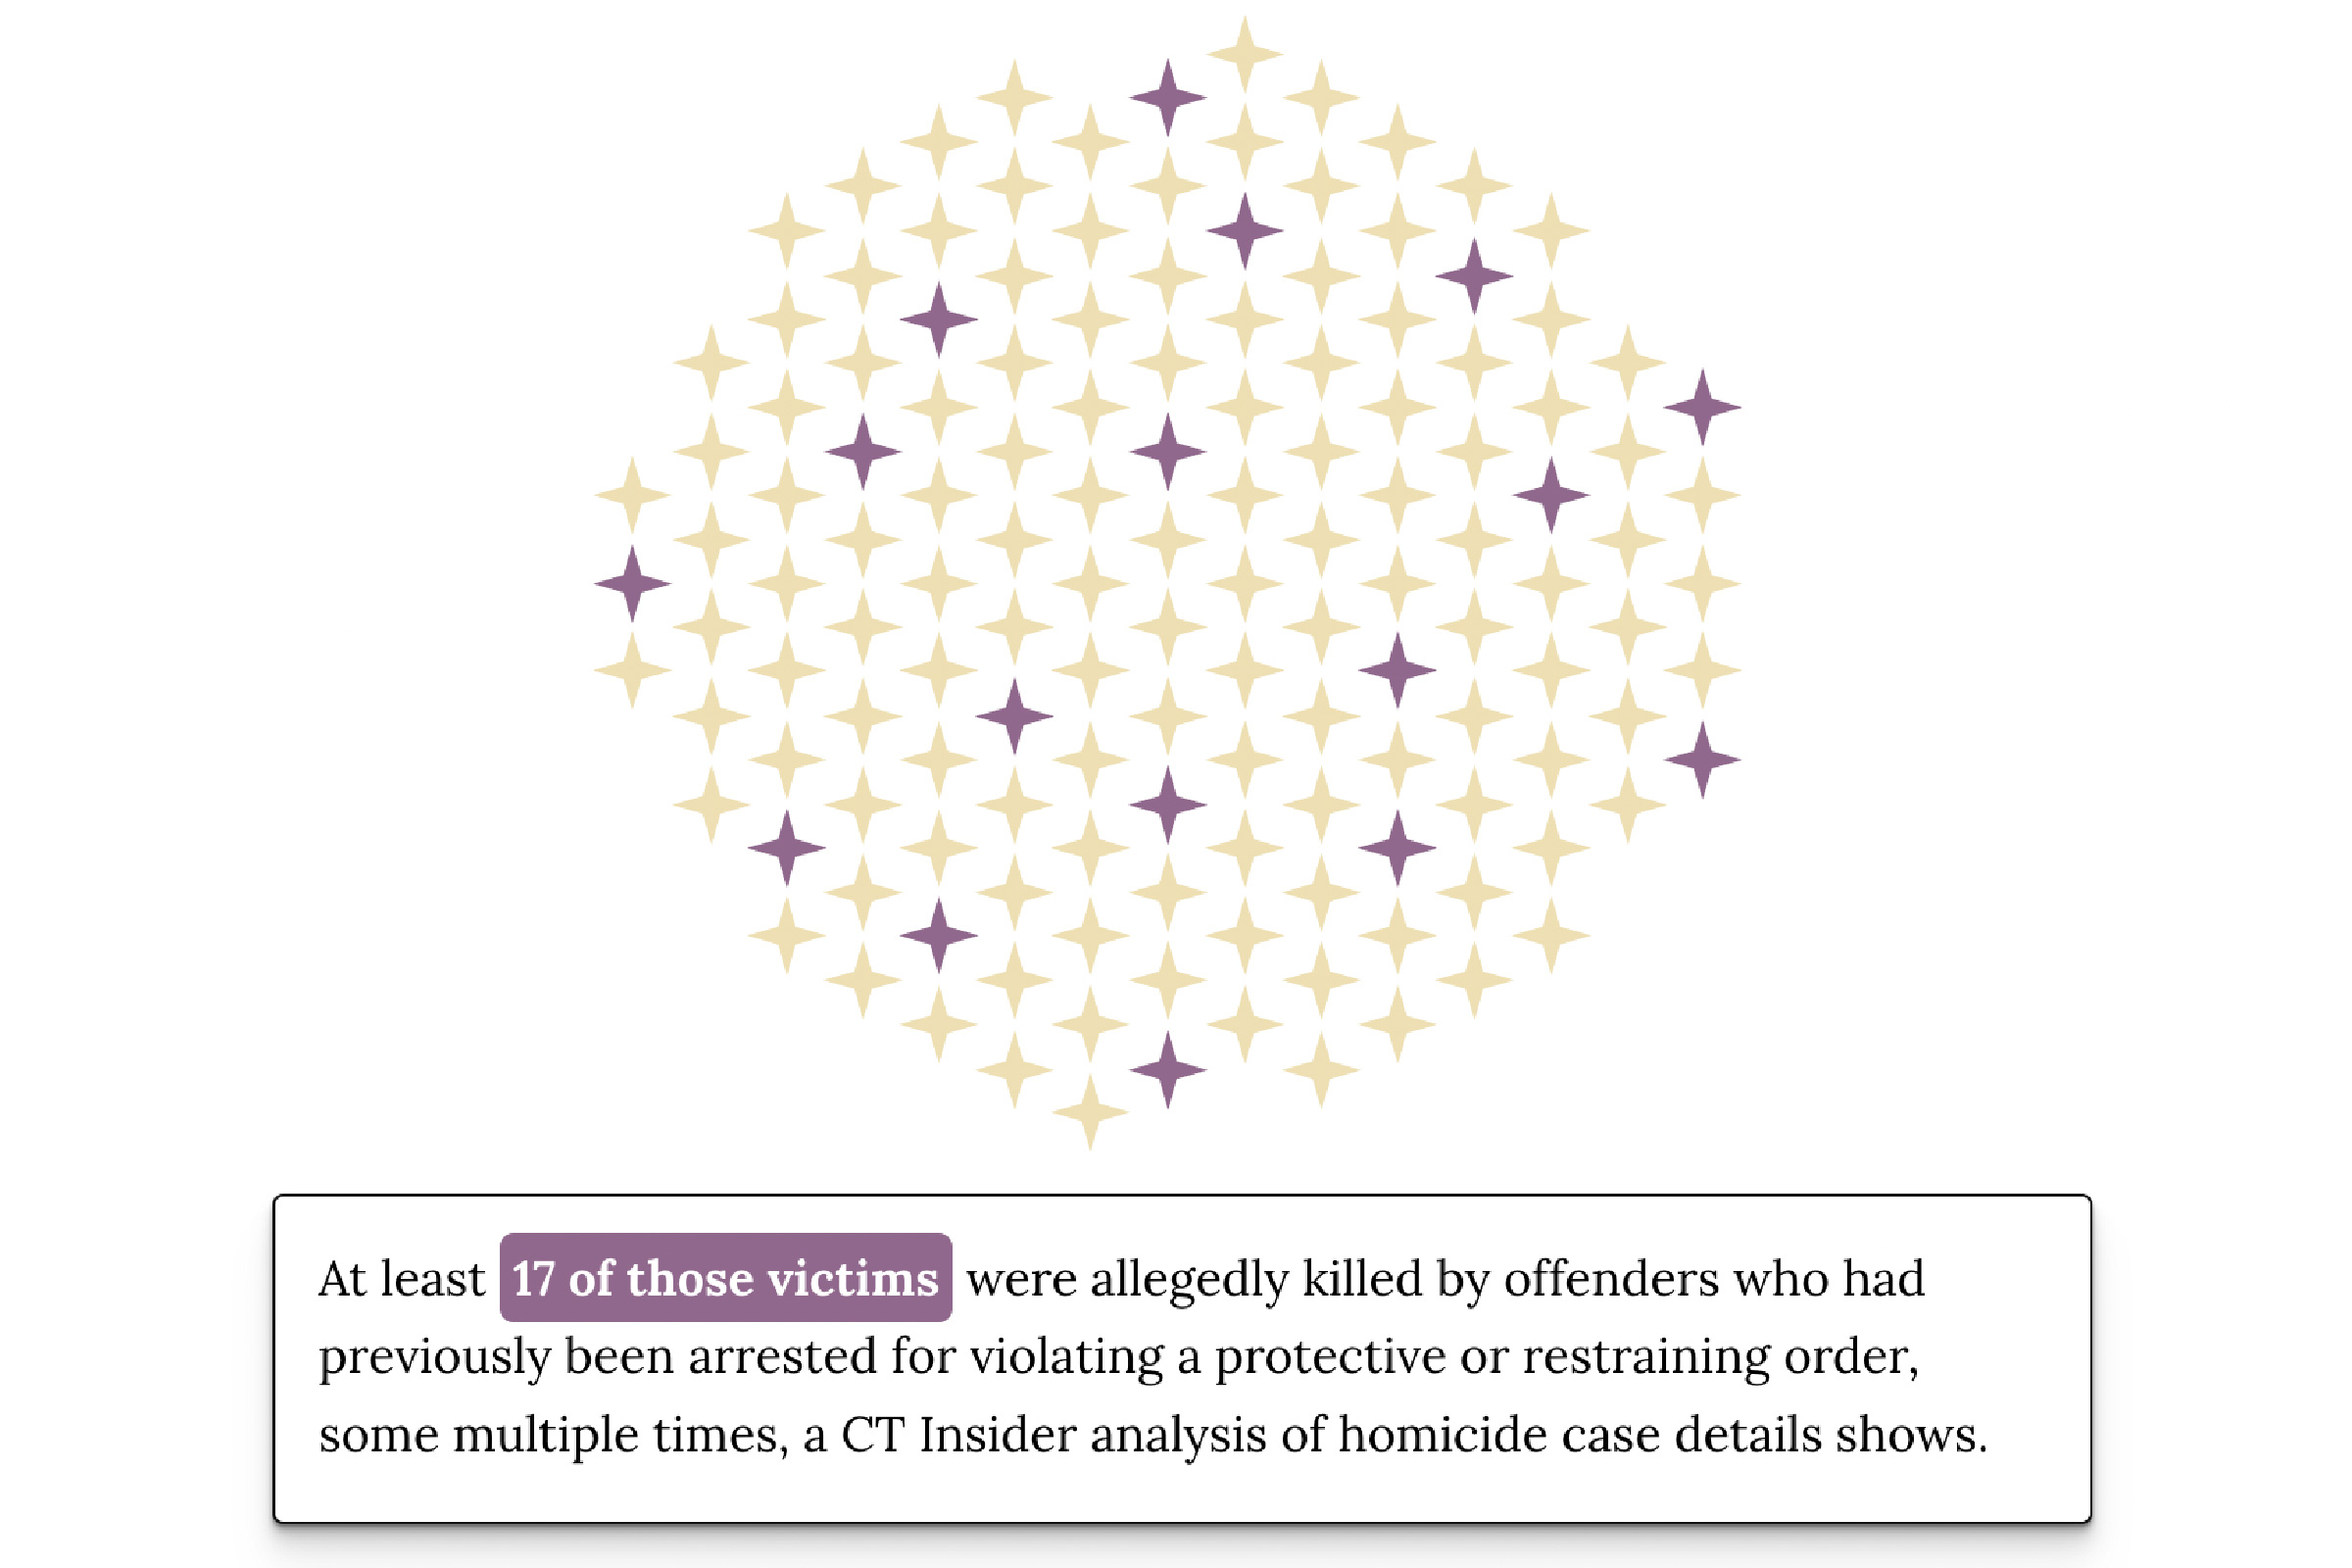 Scrolling packed dot chart showing domestic violence survivors who face domestic violence more than once in Connecticut.